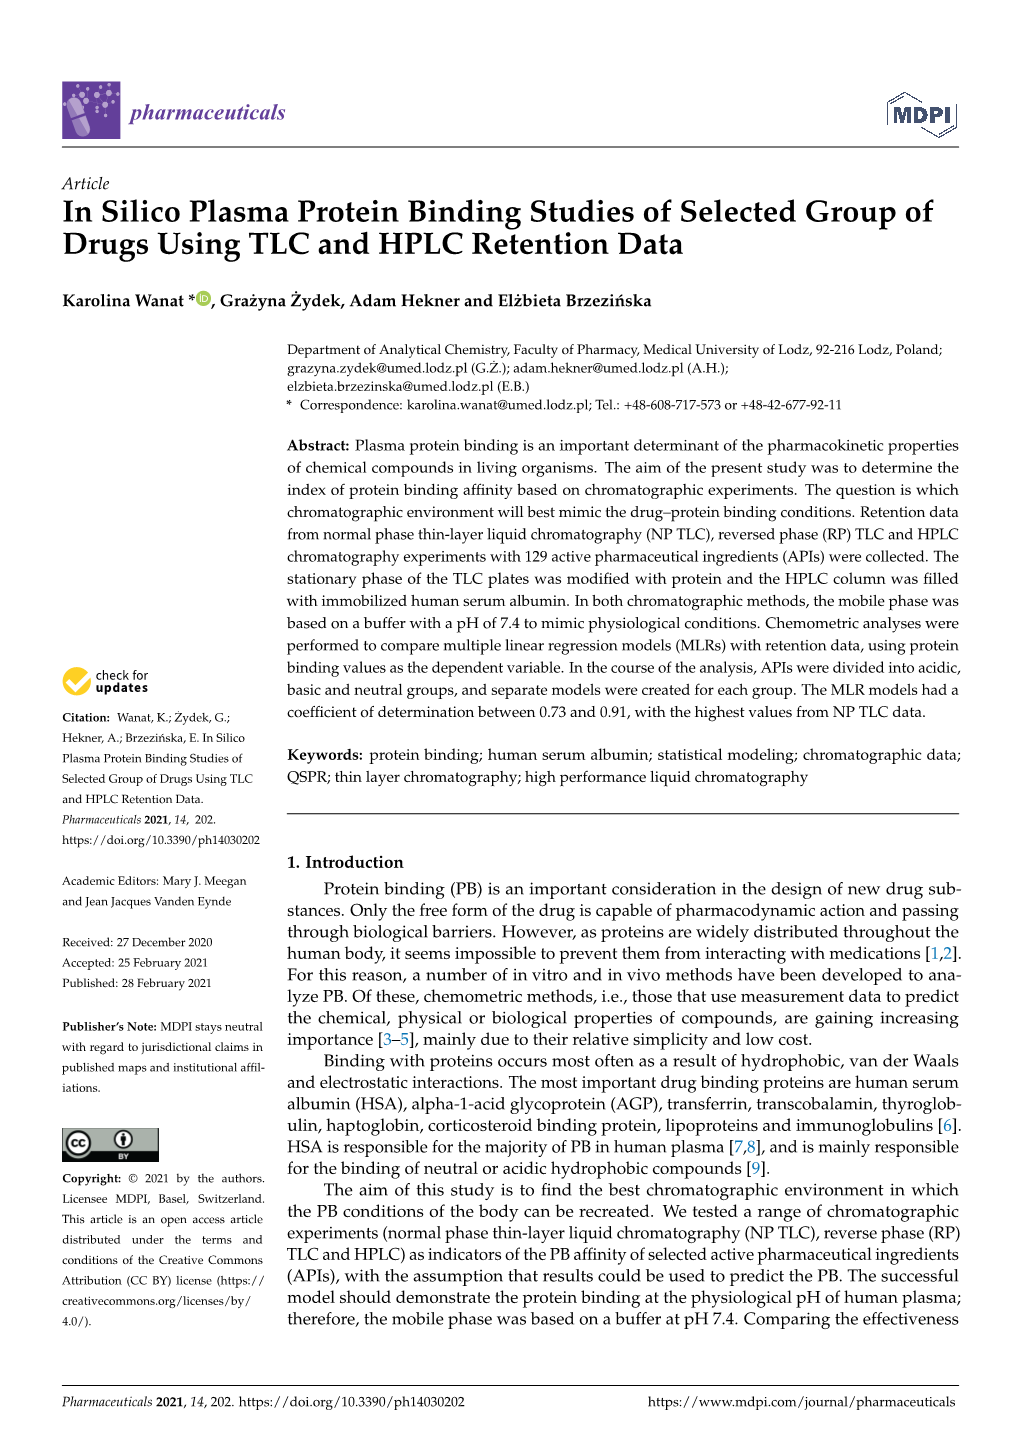 In Silico Plasma Protein Binding Studies of Selected Group of Drugs Using TLC and HPLC Retention Data